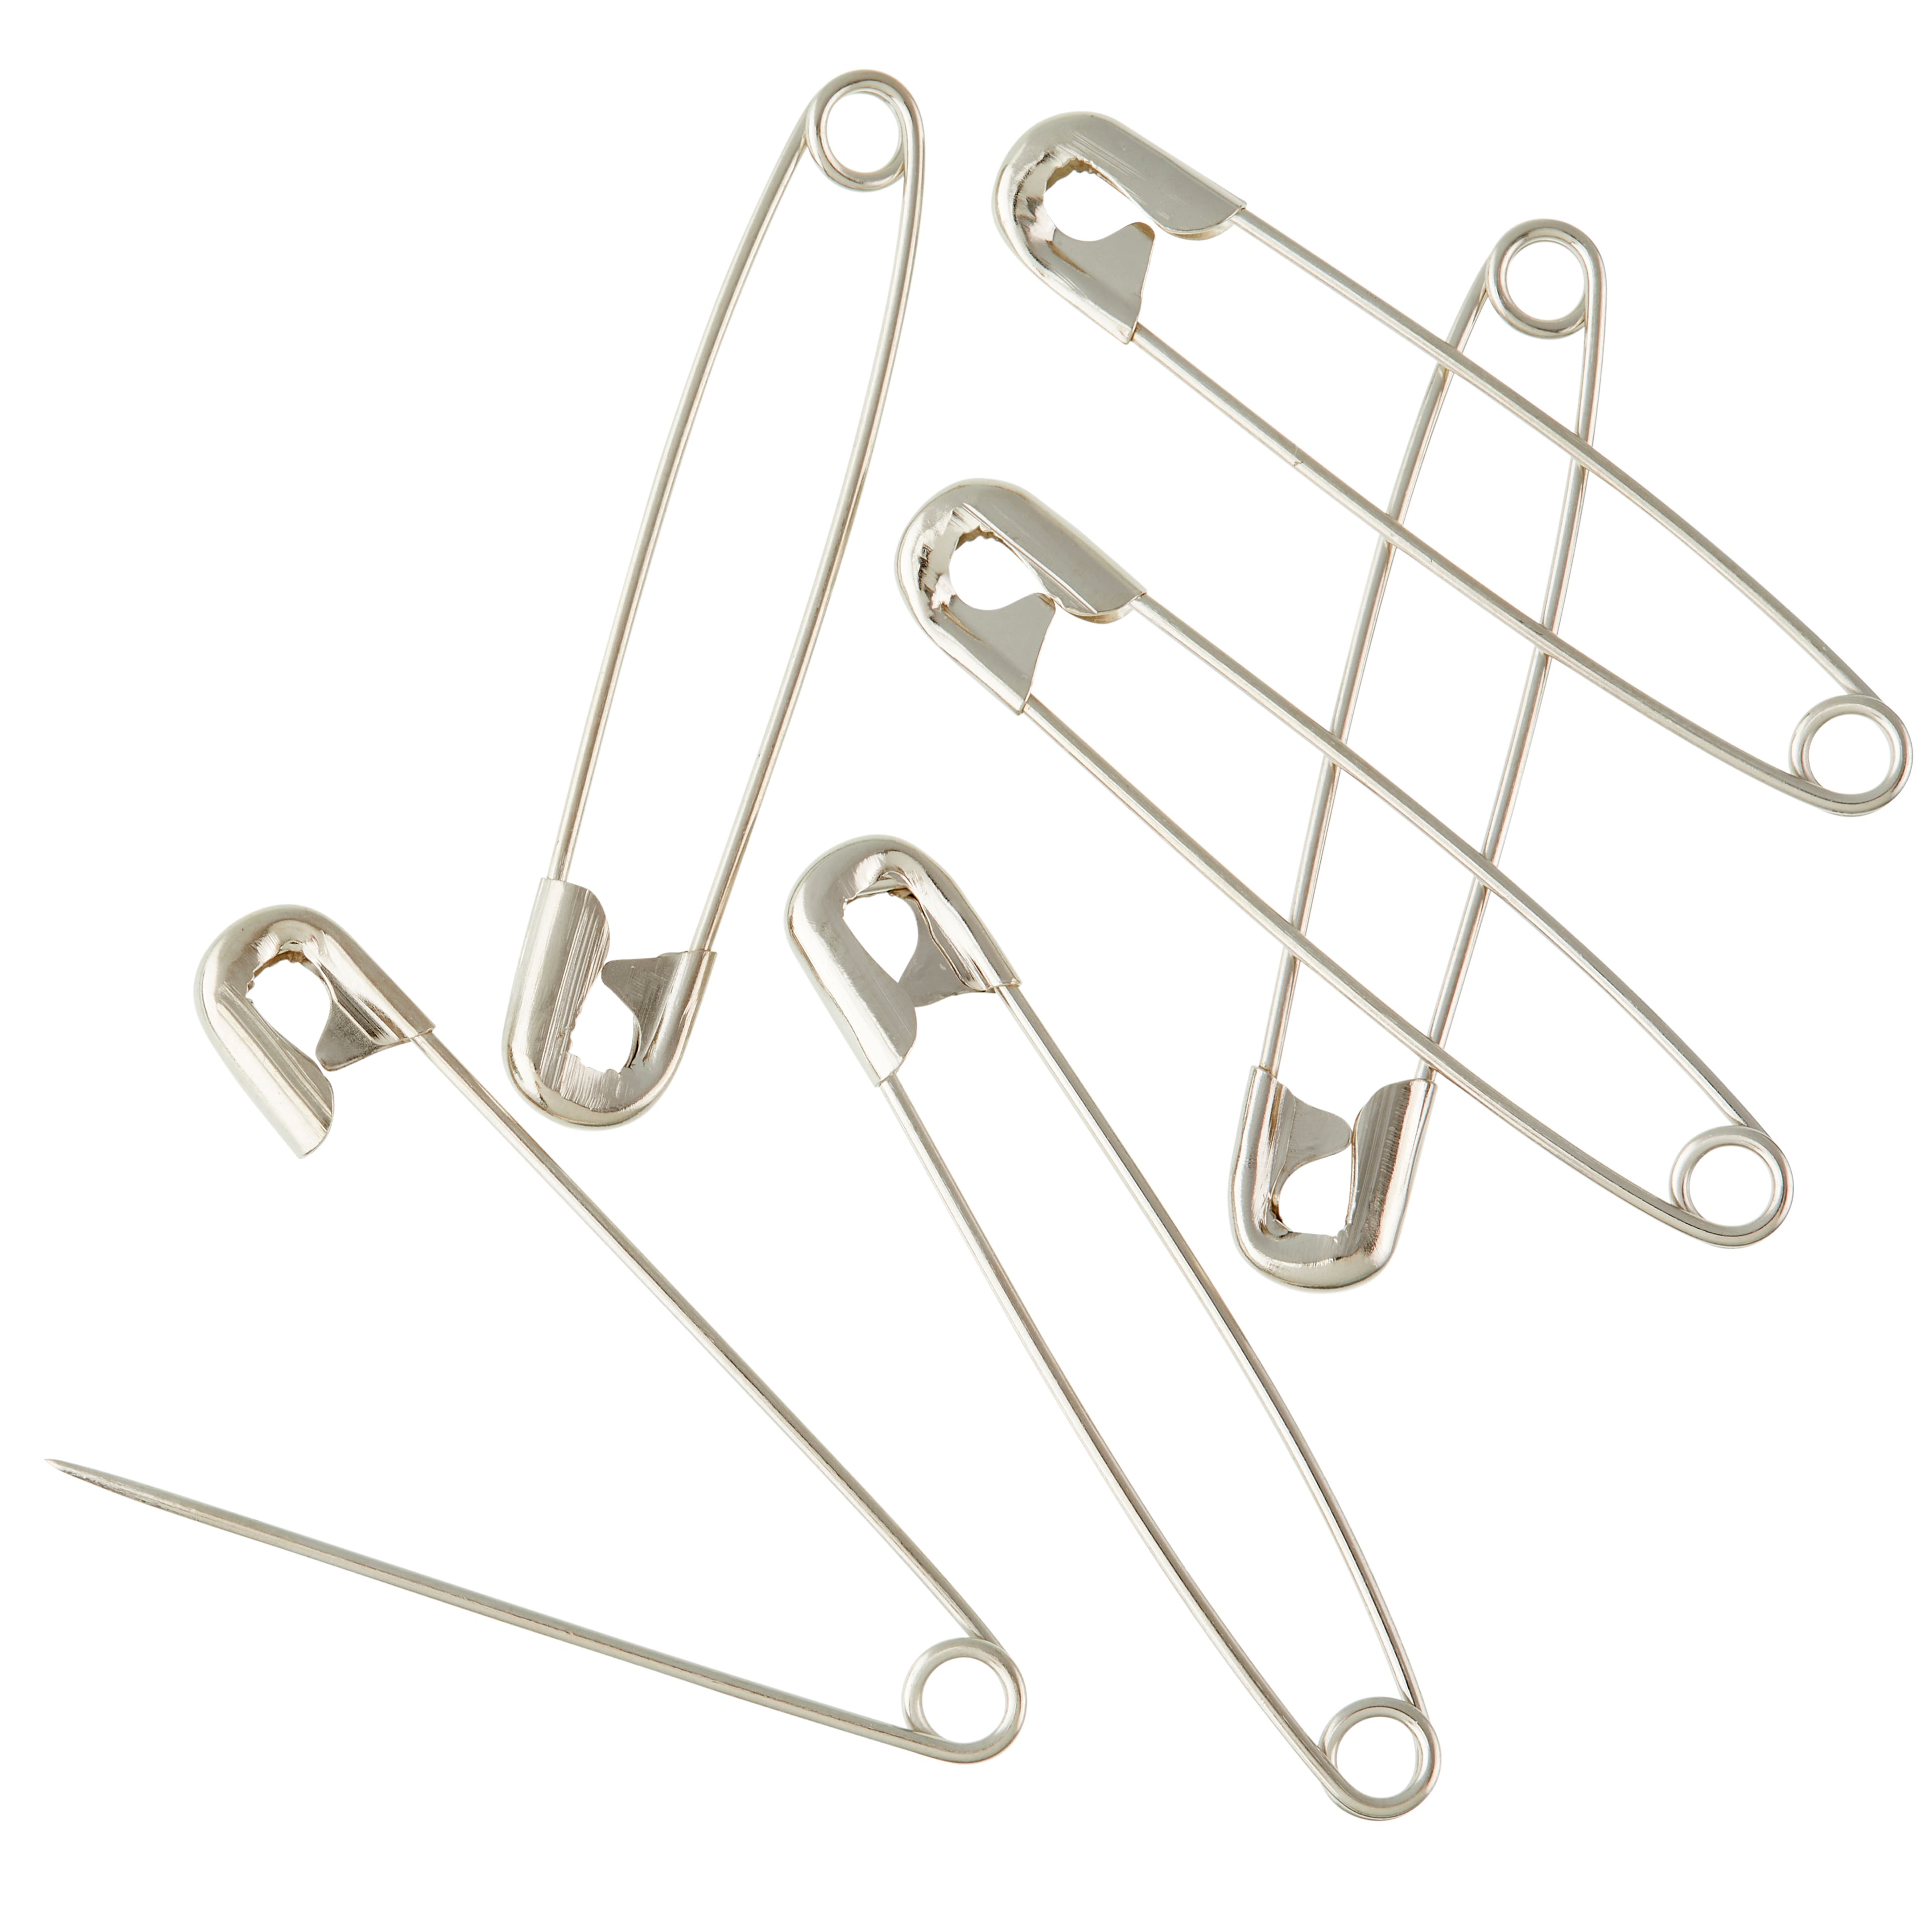 Set of 10 Giant Safety Pins, Tool Gadget Large Stainless Steel Safety Pins  for Heavy Duty Laundry